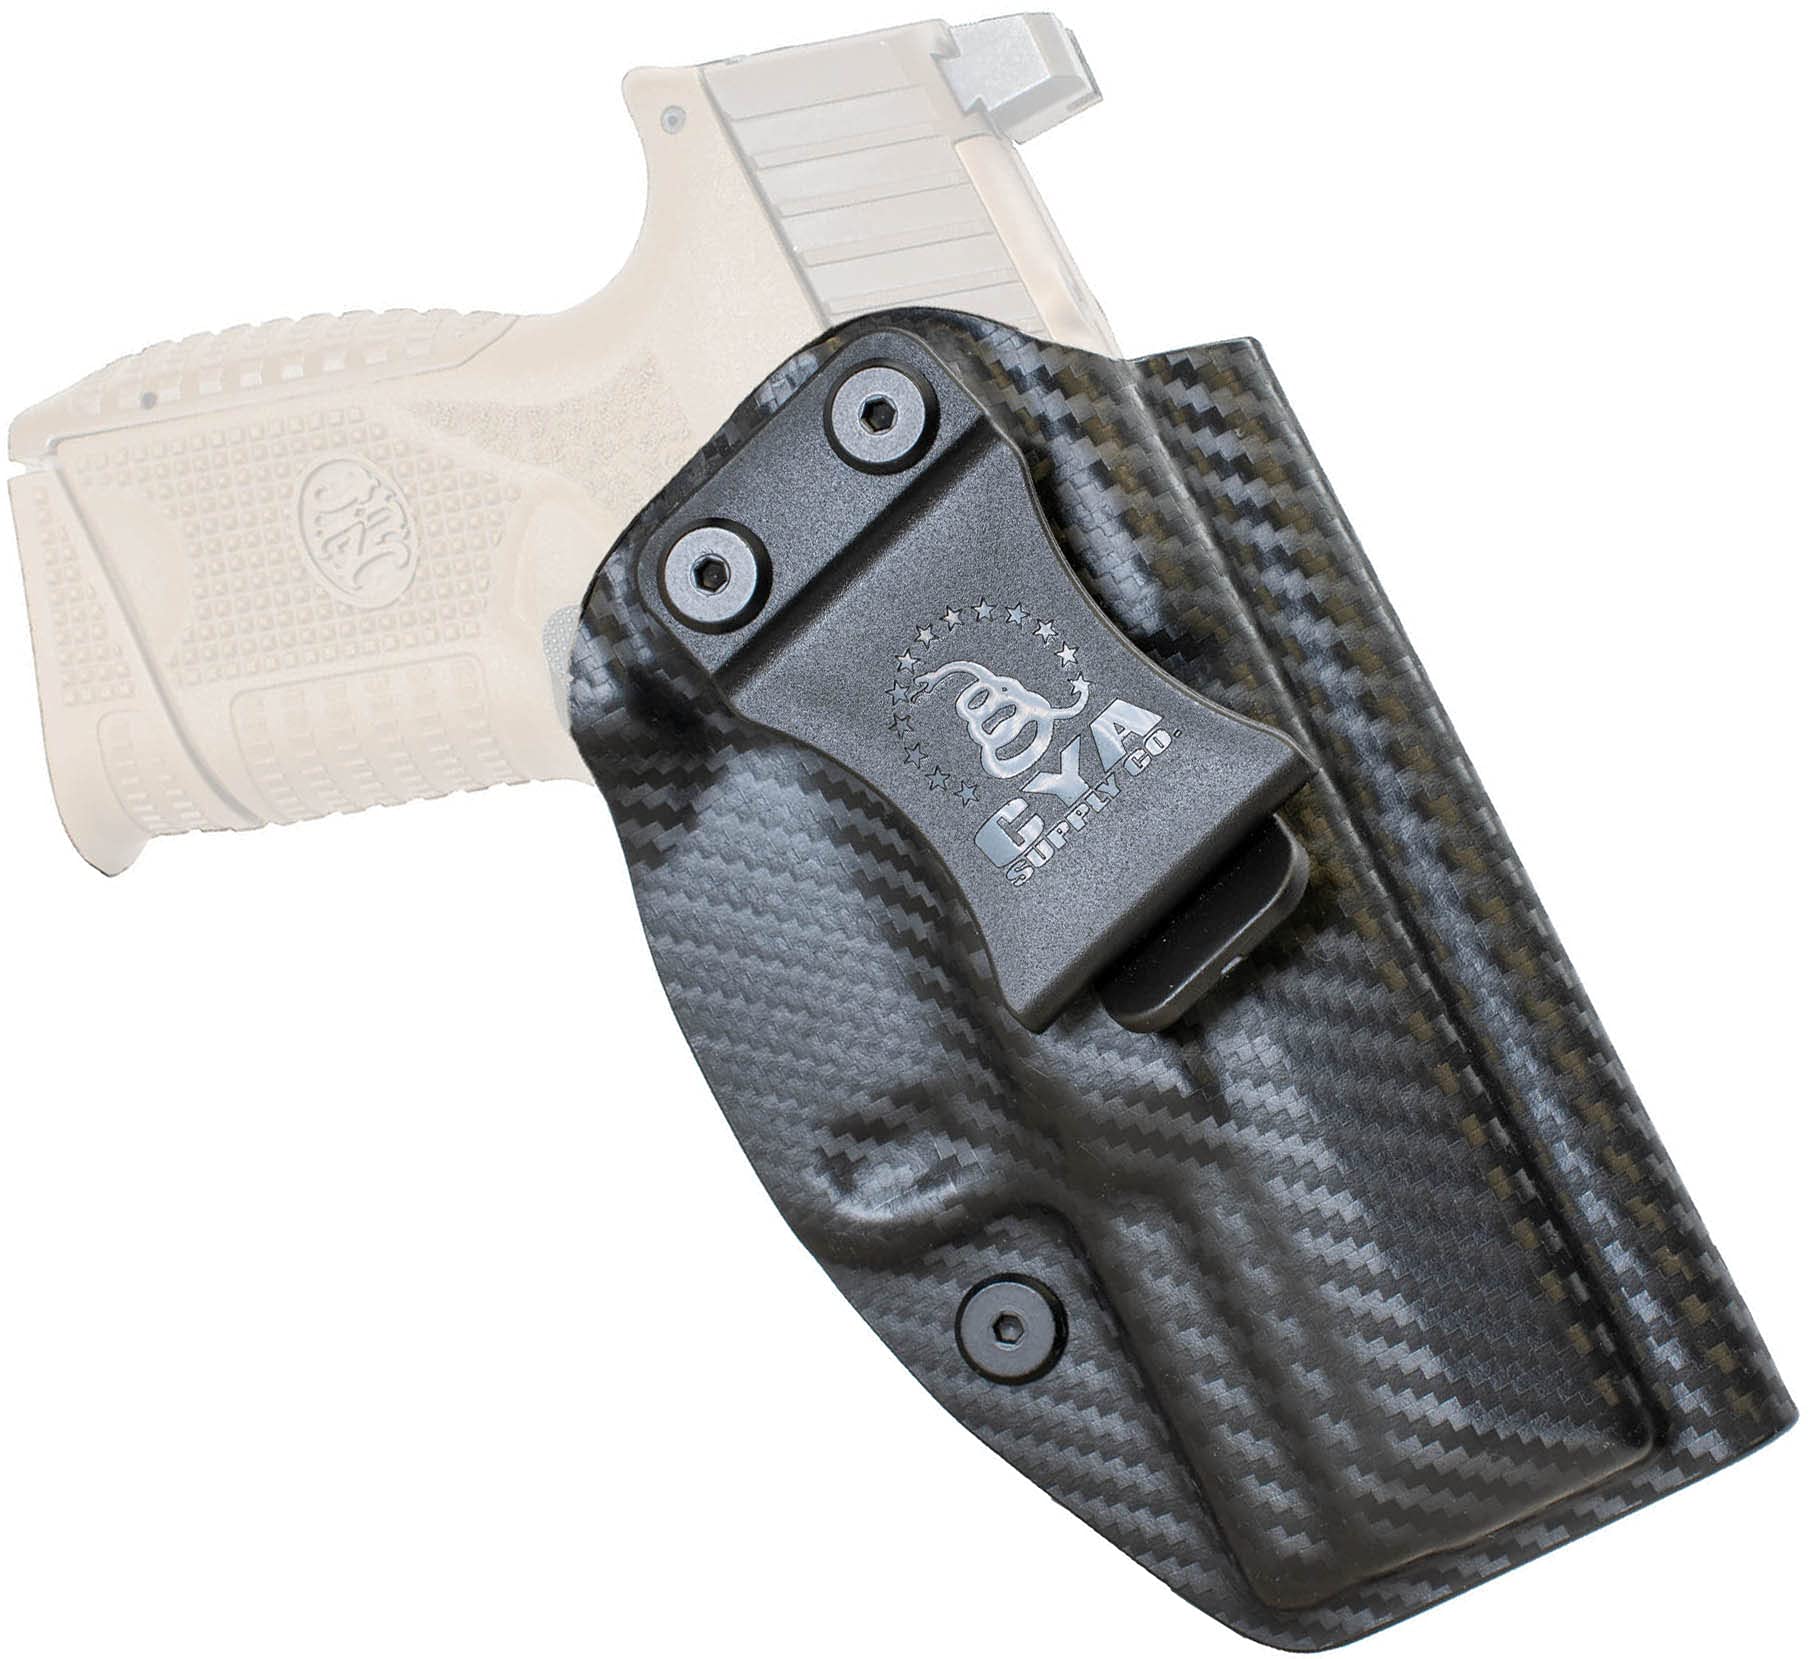 cYA Supply co Base IWB concealed carry Holster Veteran Owned Made in USA - Fits FN 509 compact MRD